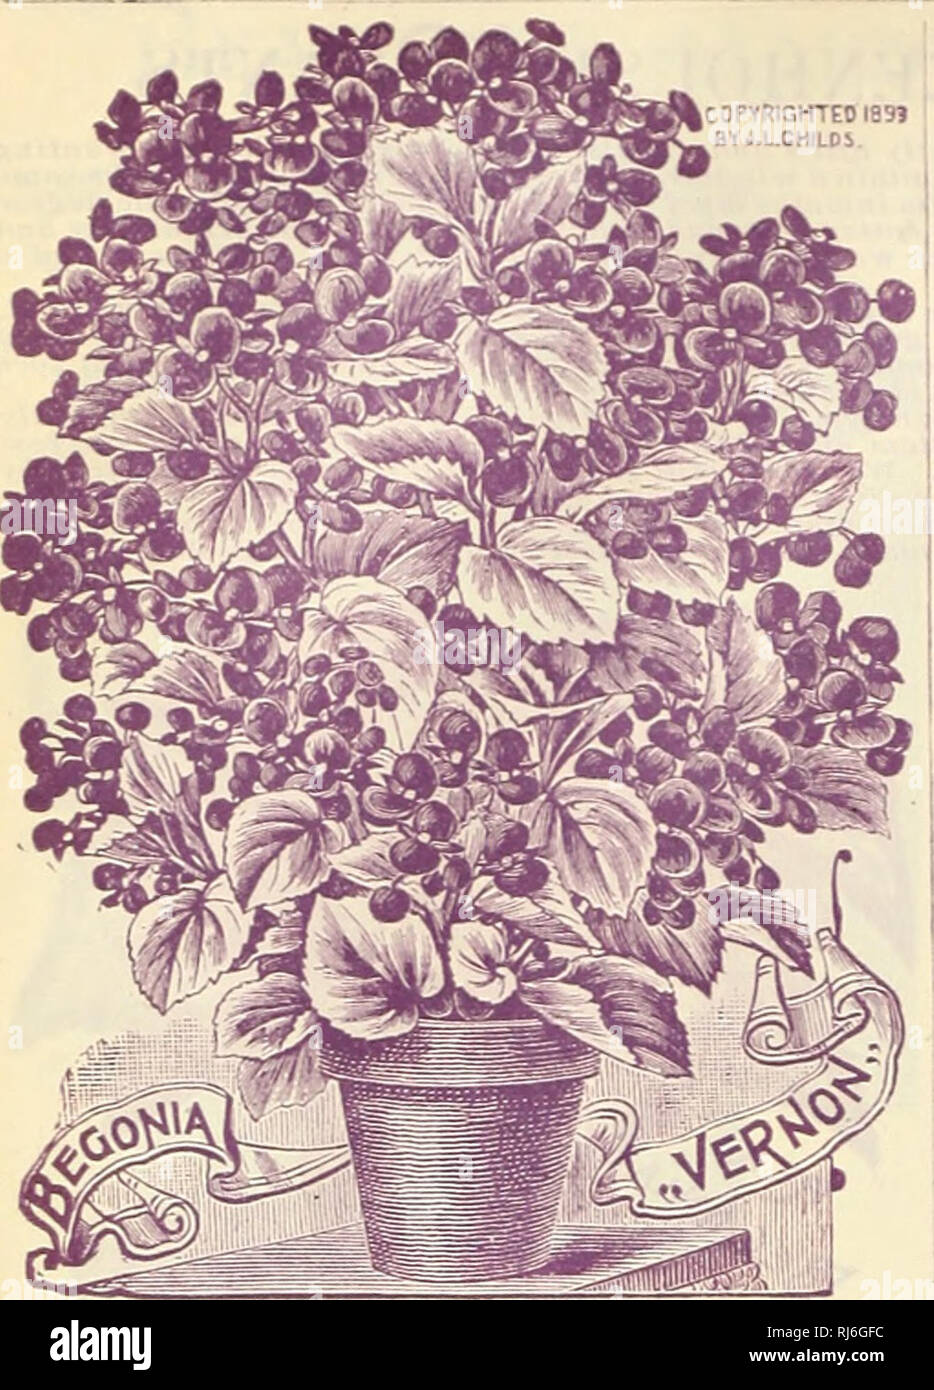 . Childs rare flowers, vegetables, and fruits. Fruit Varieties United States Catalogs; Flowers Varieties United States Catalogs; Vegetables Varieties United States Catalogs; John Lewis Childs (Firm); Fruit; Flowers; Vegetables. 1 12 JOHN LEWIS CHILDS, FLORAL PARK. QUEENS CO., N. Y. COPYRIGHTED 1891 Bt J.L.CMJLDS. No other kinds of flowering Begonias can begin to coni- eare with the varities of B. Vernon for beauty and constant loom. They are so much superior to others that we have concluded to offer none but these. Plants flower perpetually all the year round, the plant being completely covere Stock Photo